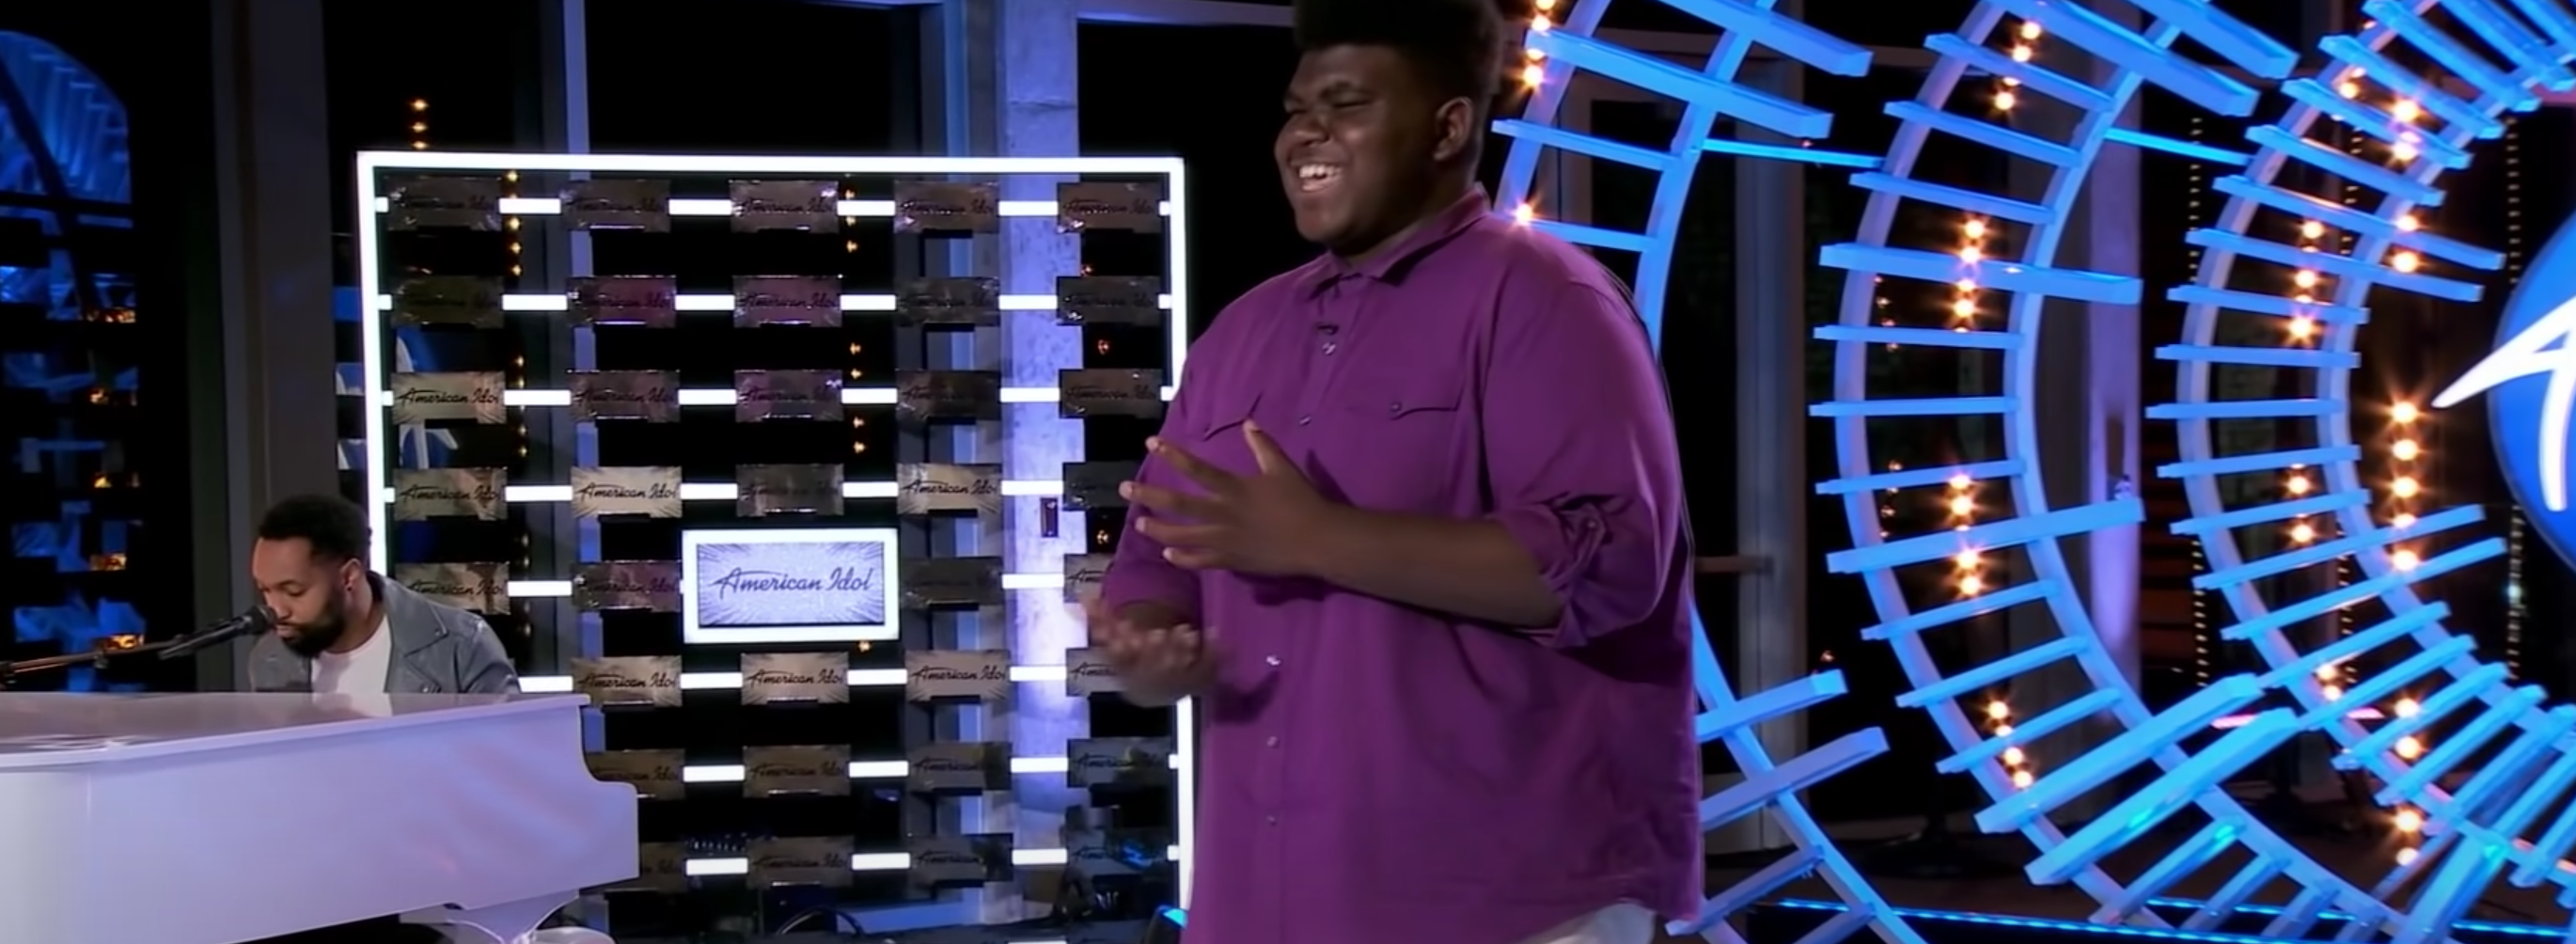 Douglas Mills Gets a Standing Ovation from Judges During ‘American Idol’ Audition